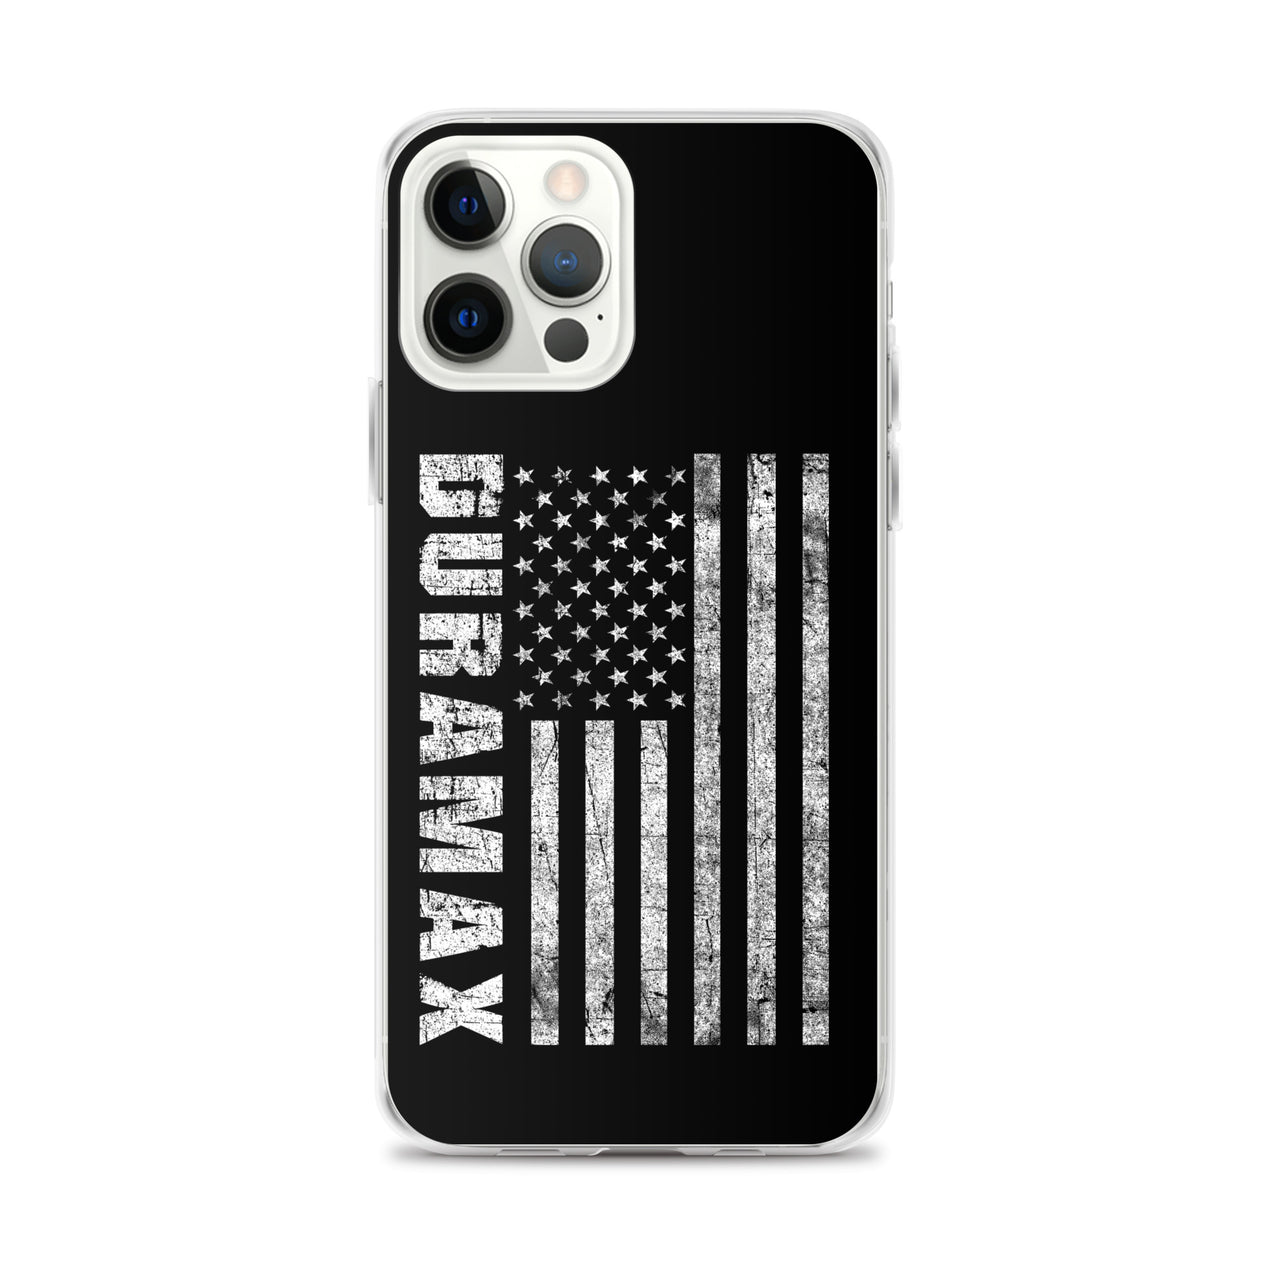 Duramax American Flag Protective Phone Case - Fits iPhone 12 pro max